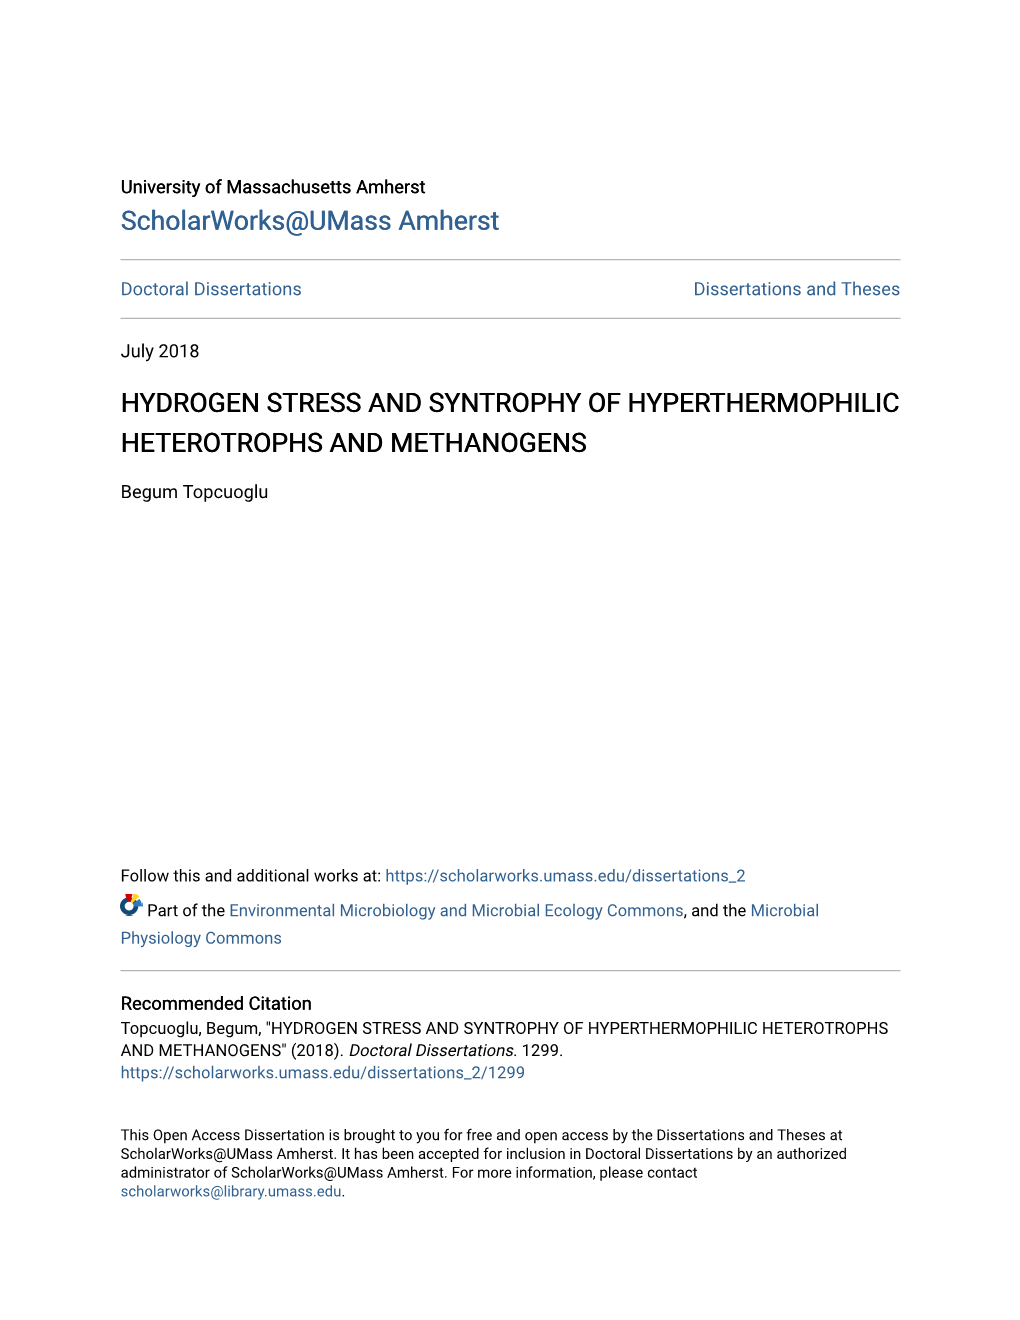 Hydrogen Stress and Syntrophy of Hyperthermophilic Heterotrophs and Methanogens